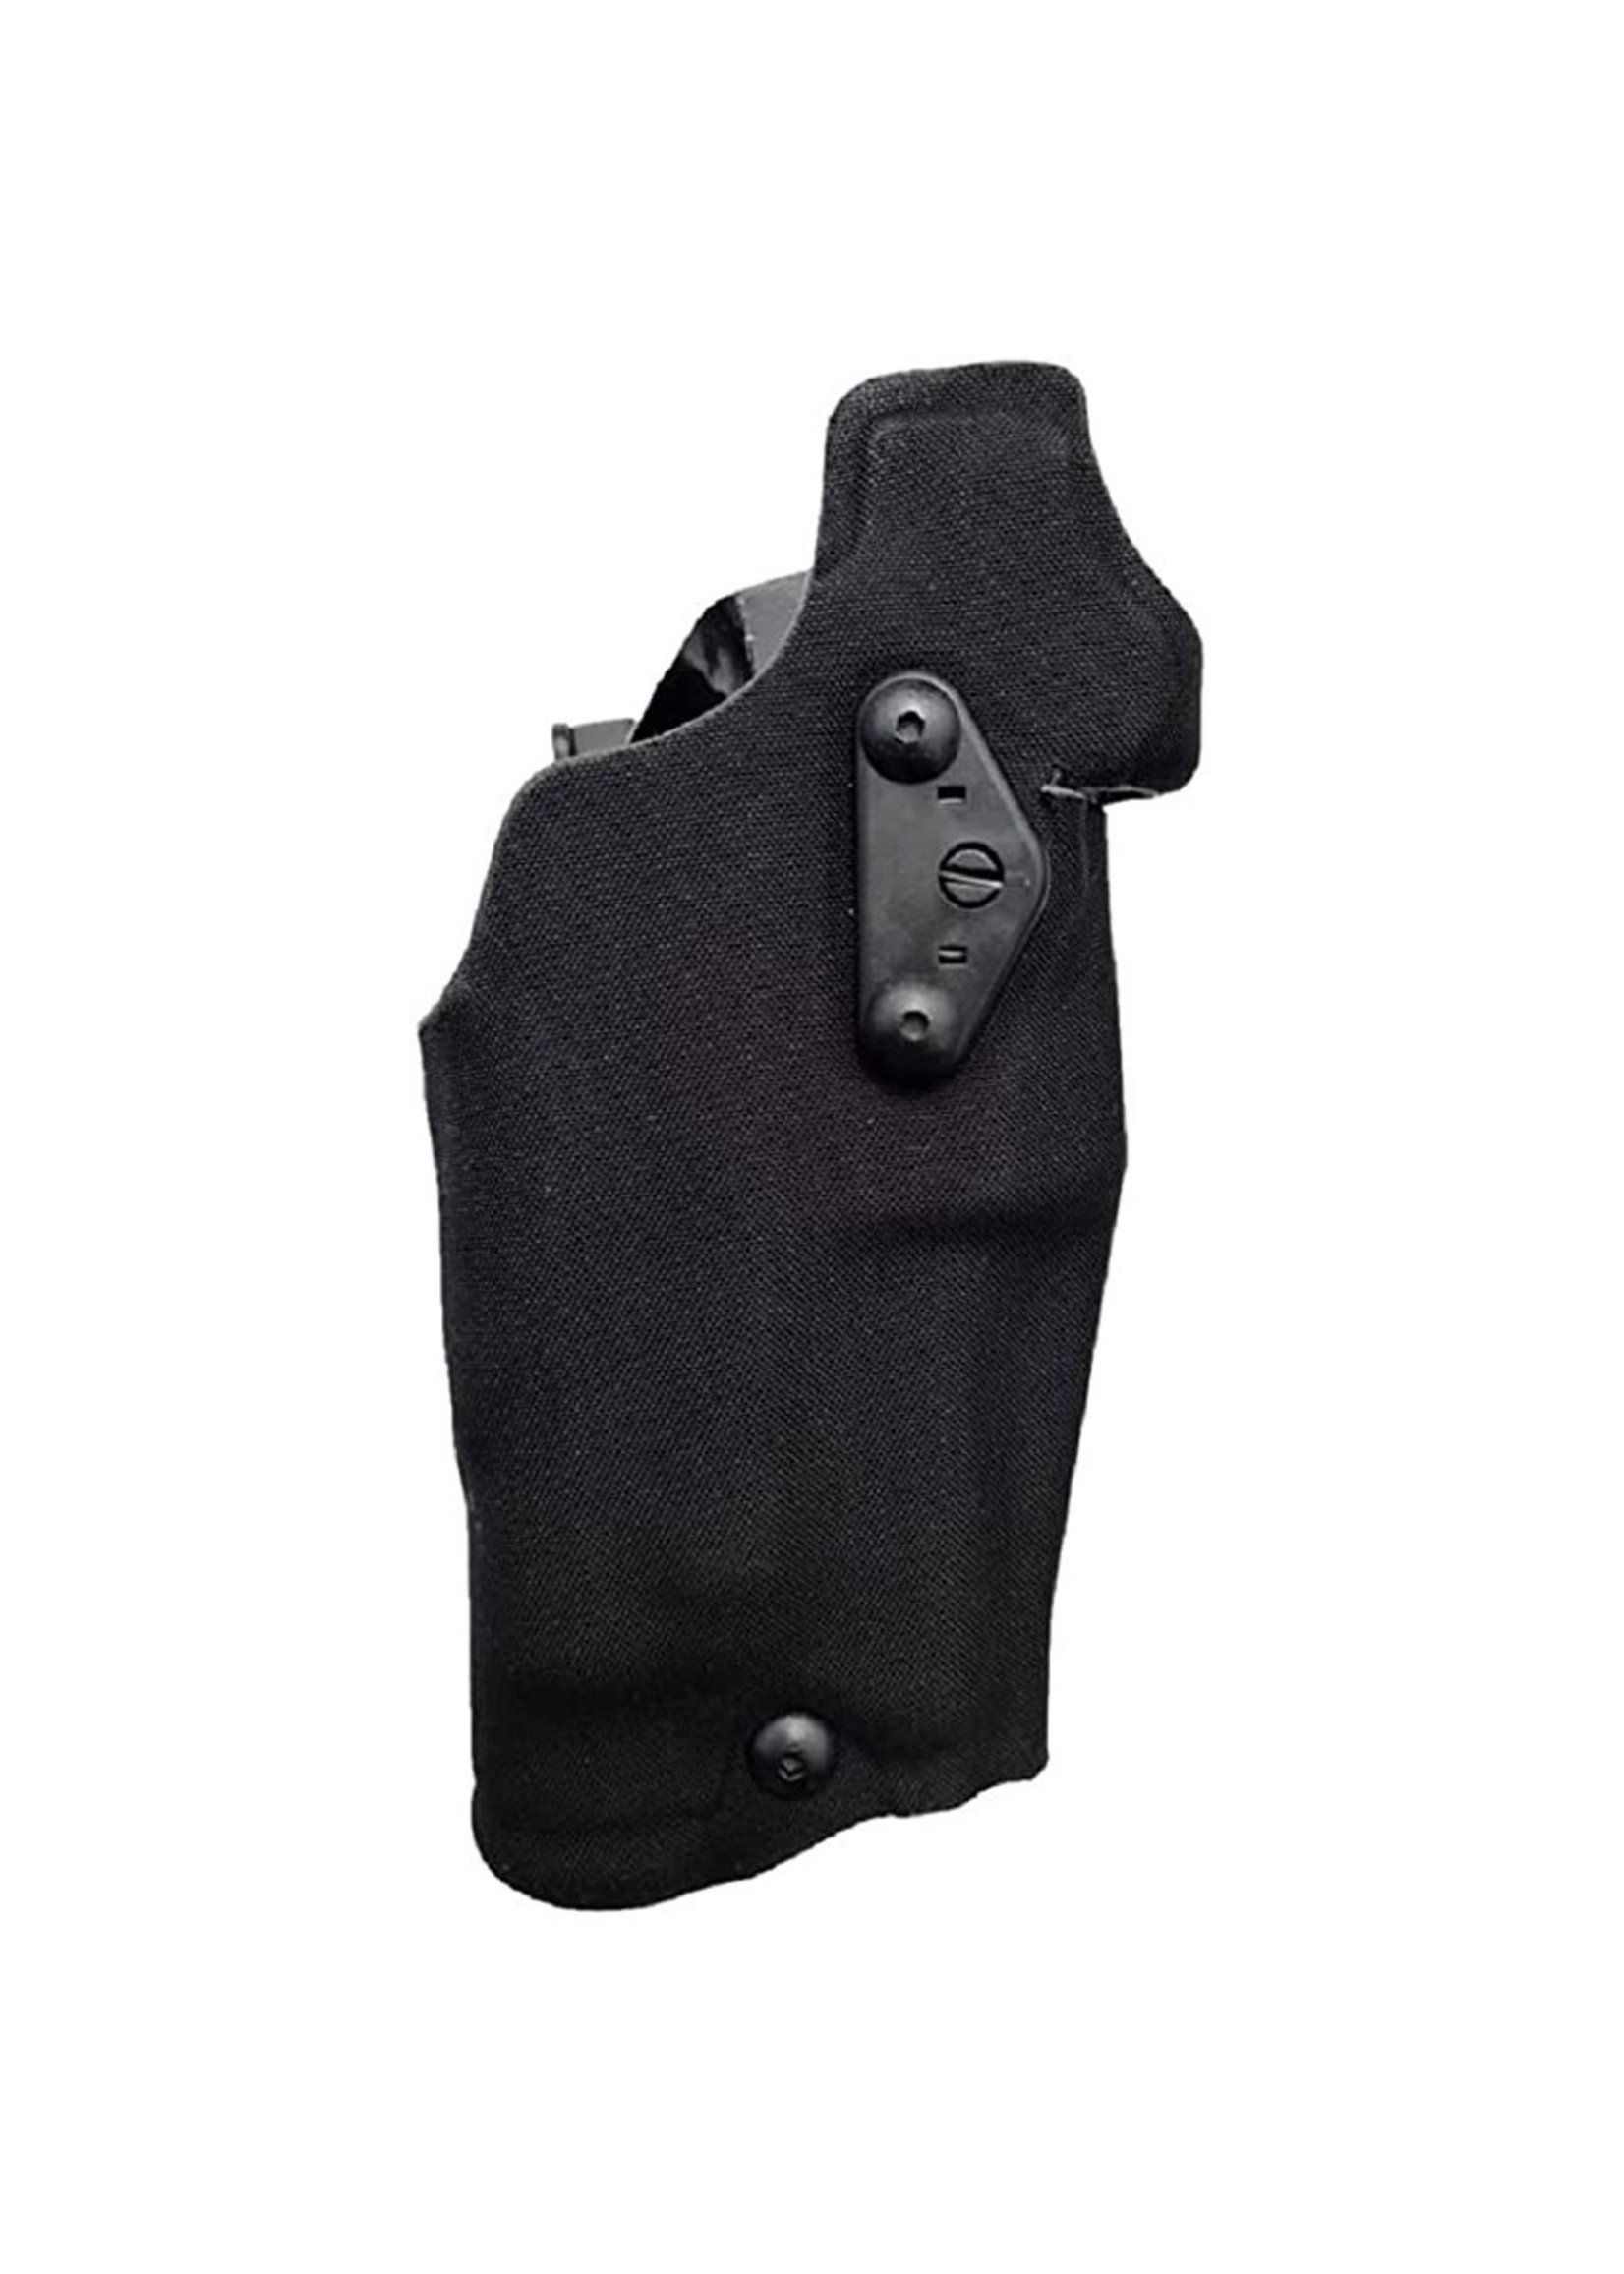 Safariland ALS Optic Tactical Leg Holster for Glock 17, 22 with Light  MultiCam Cordura Finish [FC-781602540278] - Cheaper Than Dirt